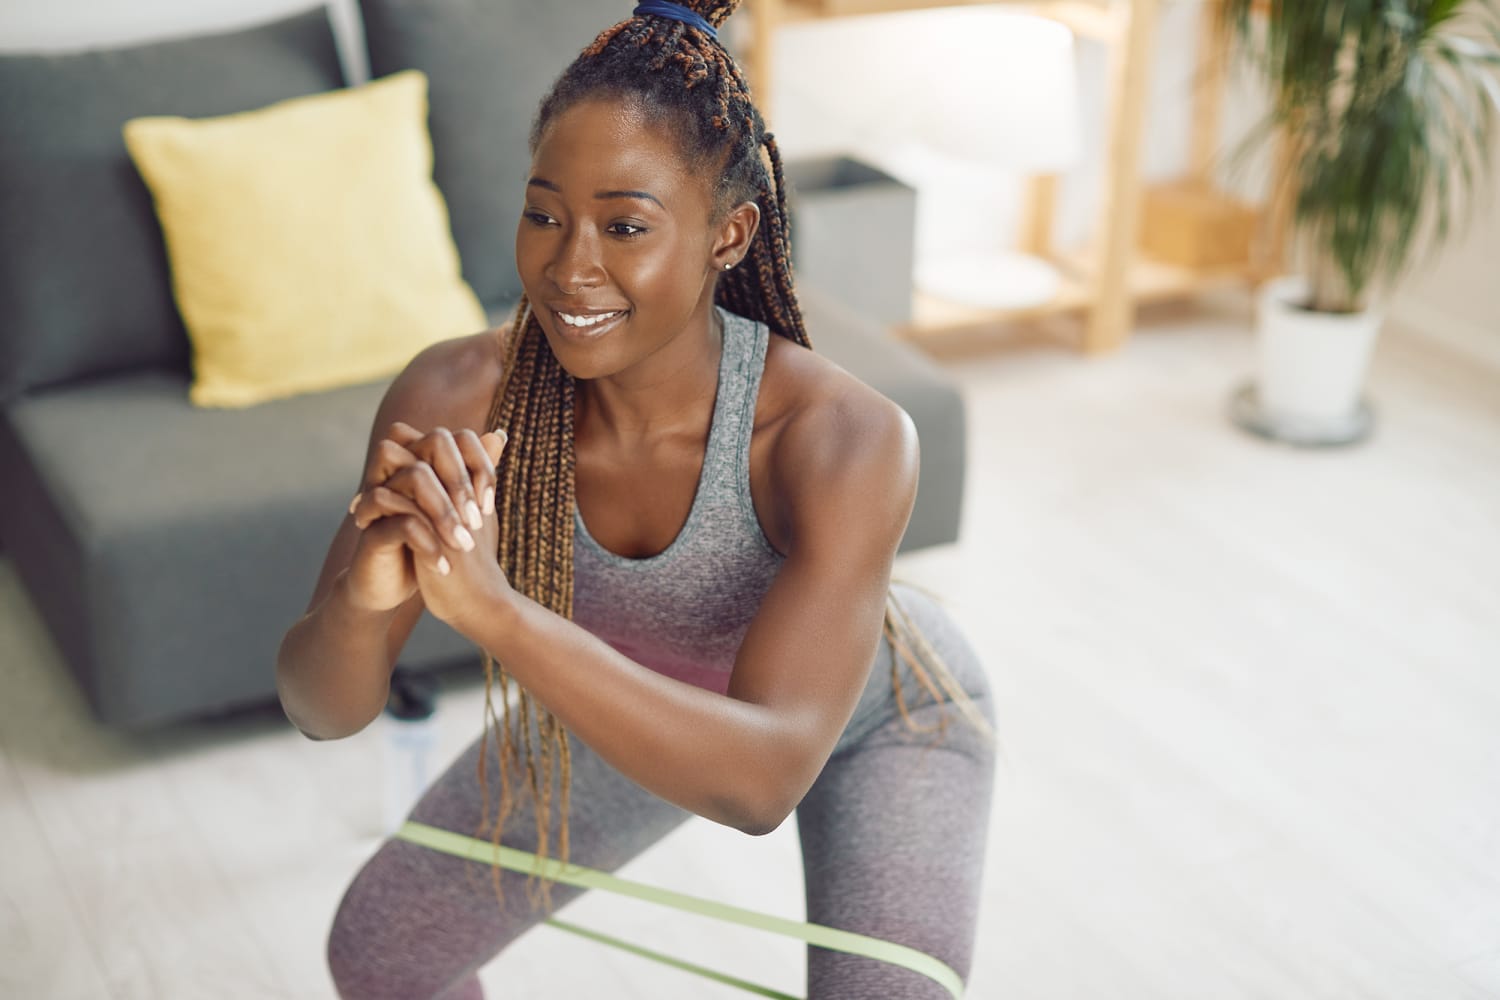 Yoga for fibromyalgia: Poses, research, and more